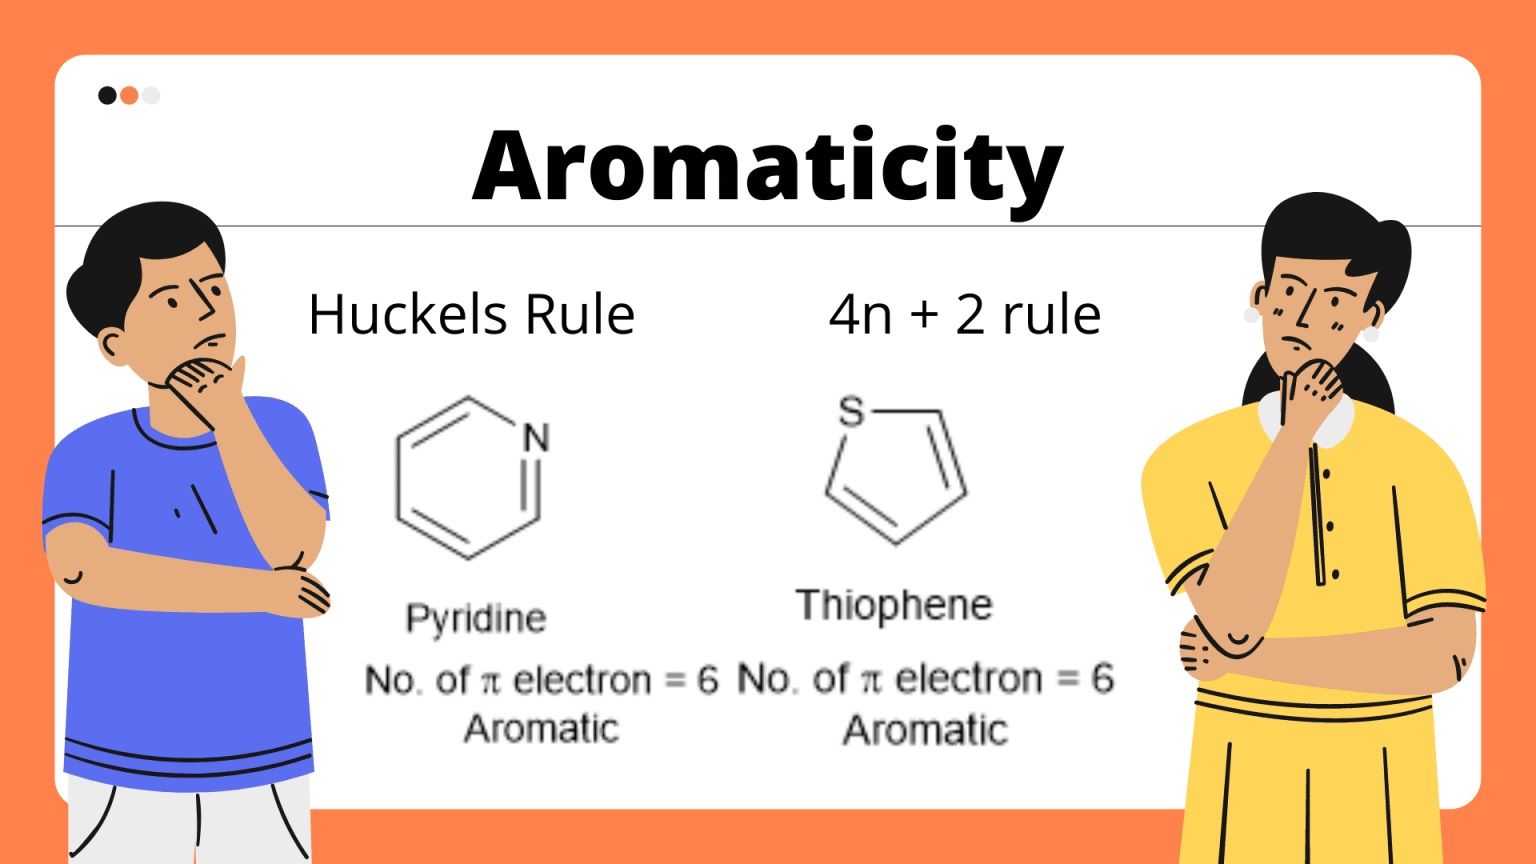 20-captivating-facts-about-aromaticity